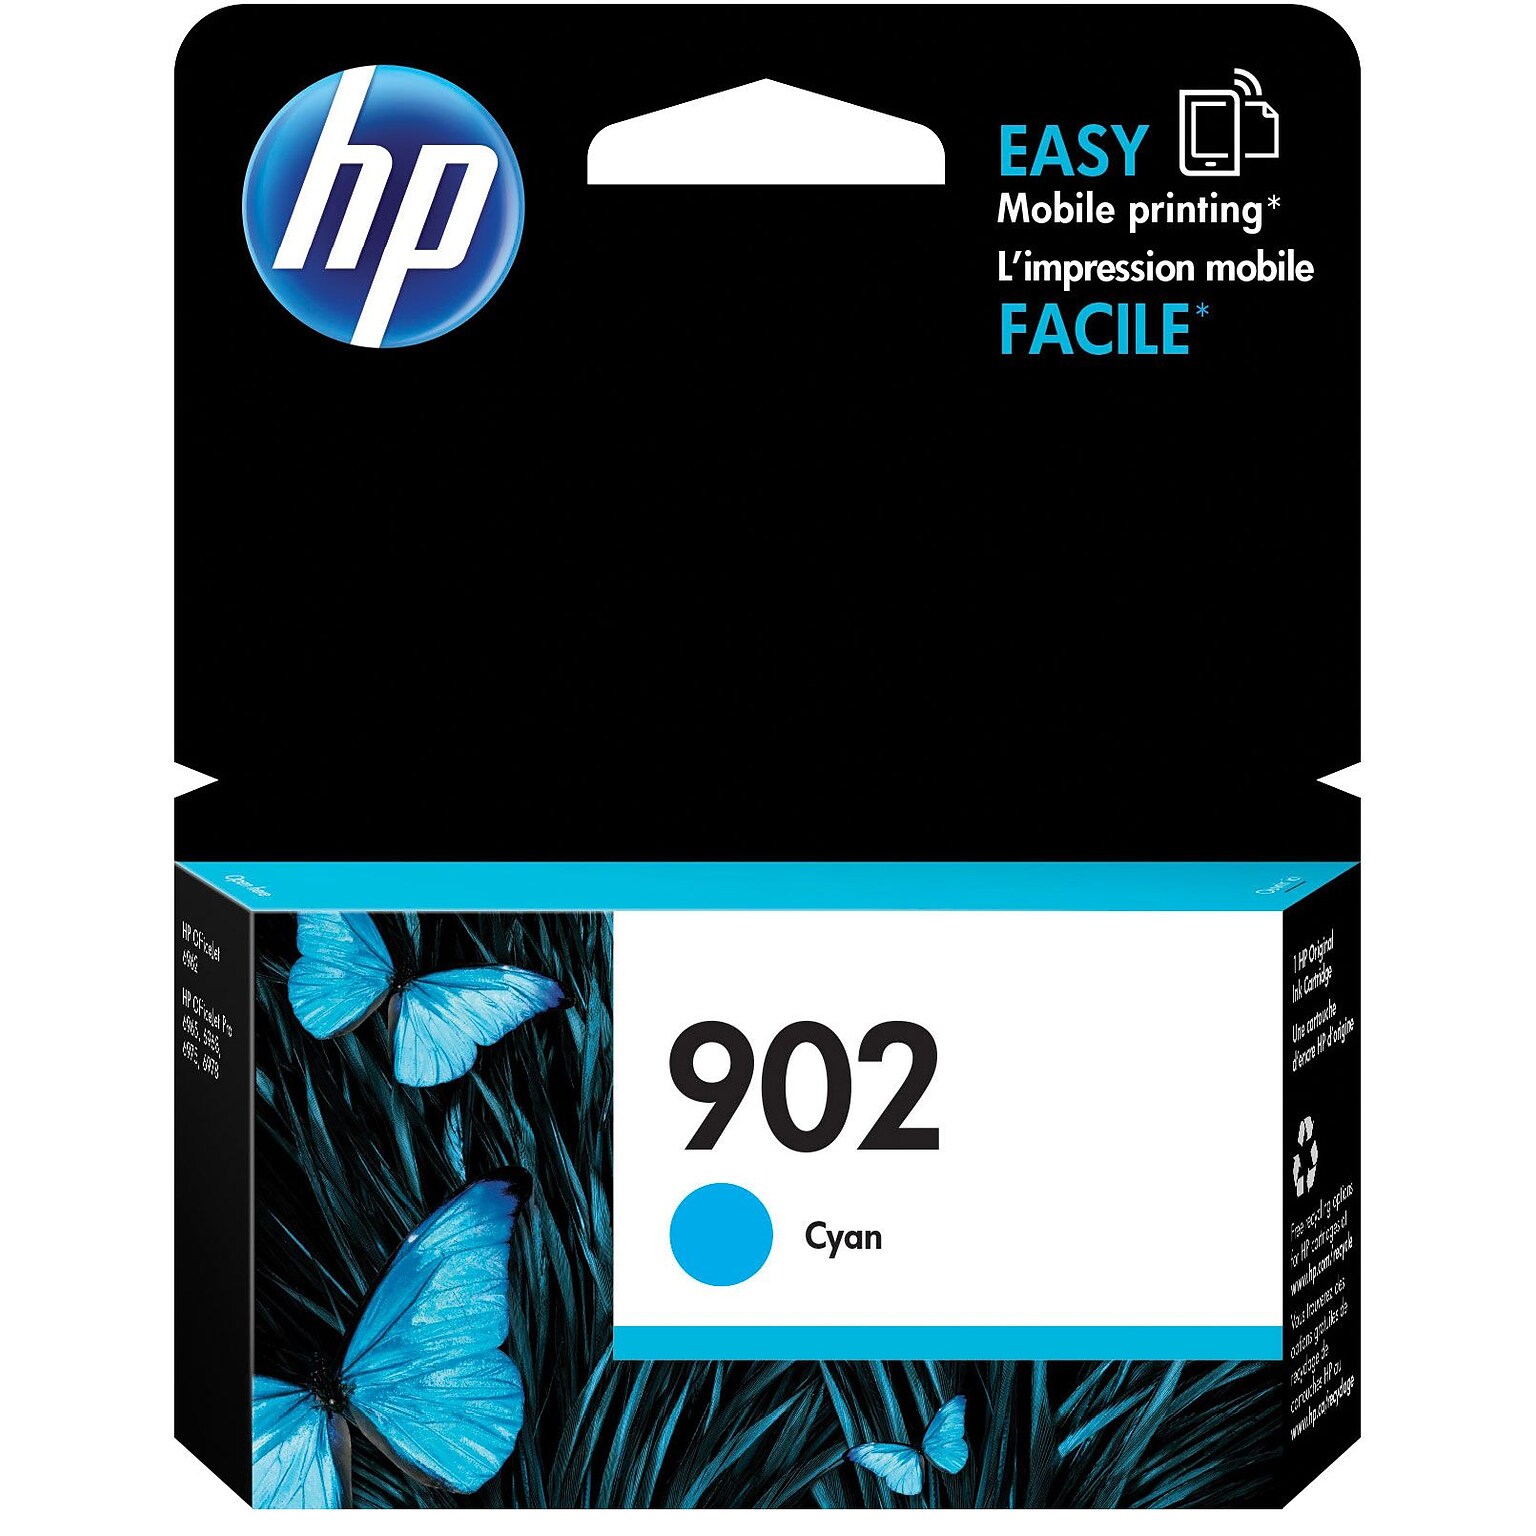 HP 902 Cyan Standard Yield Ink Cartridge (T6L86AN#140), print up to 315 pages